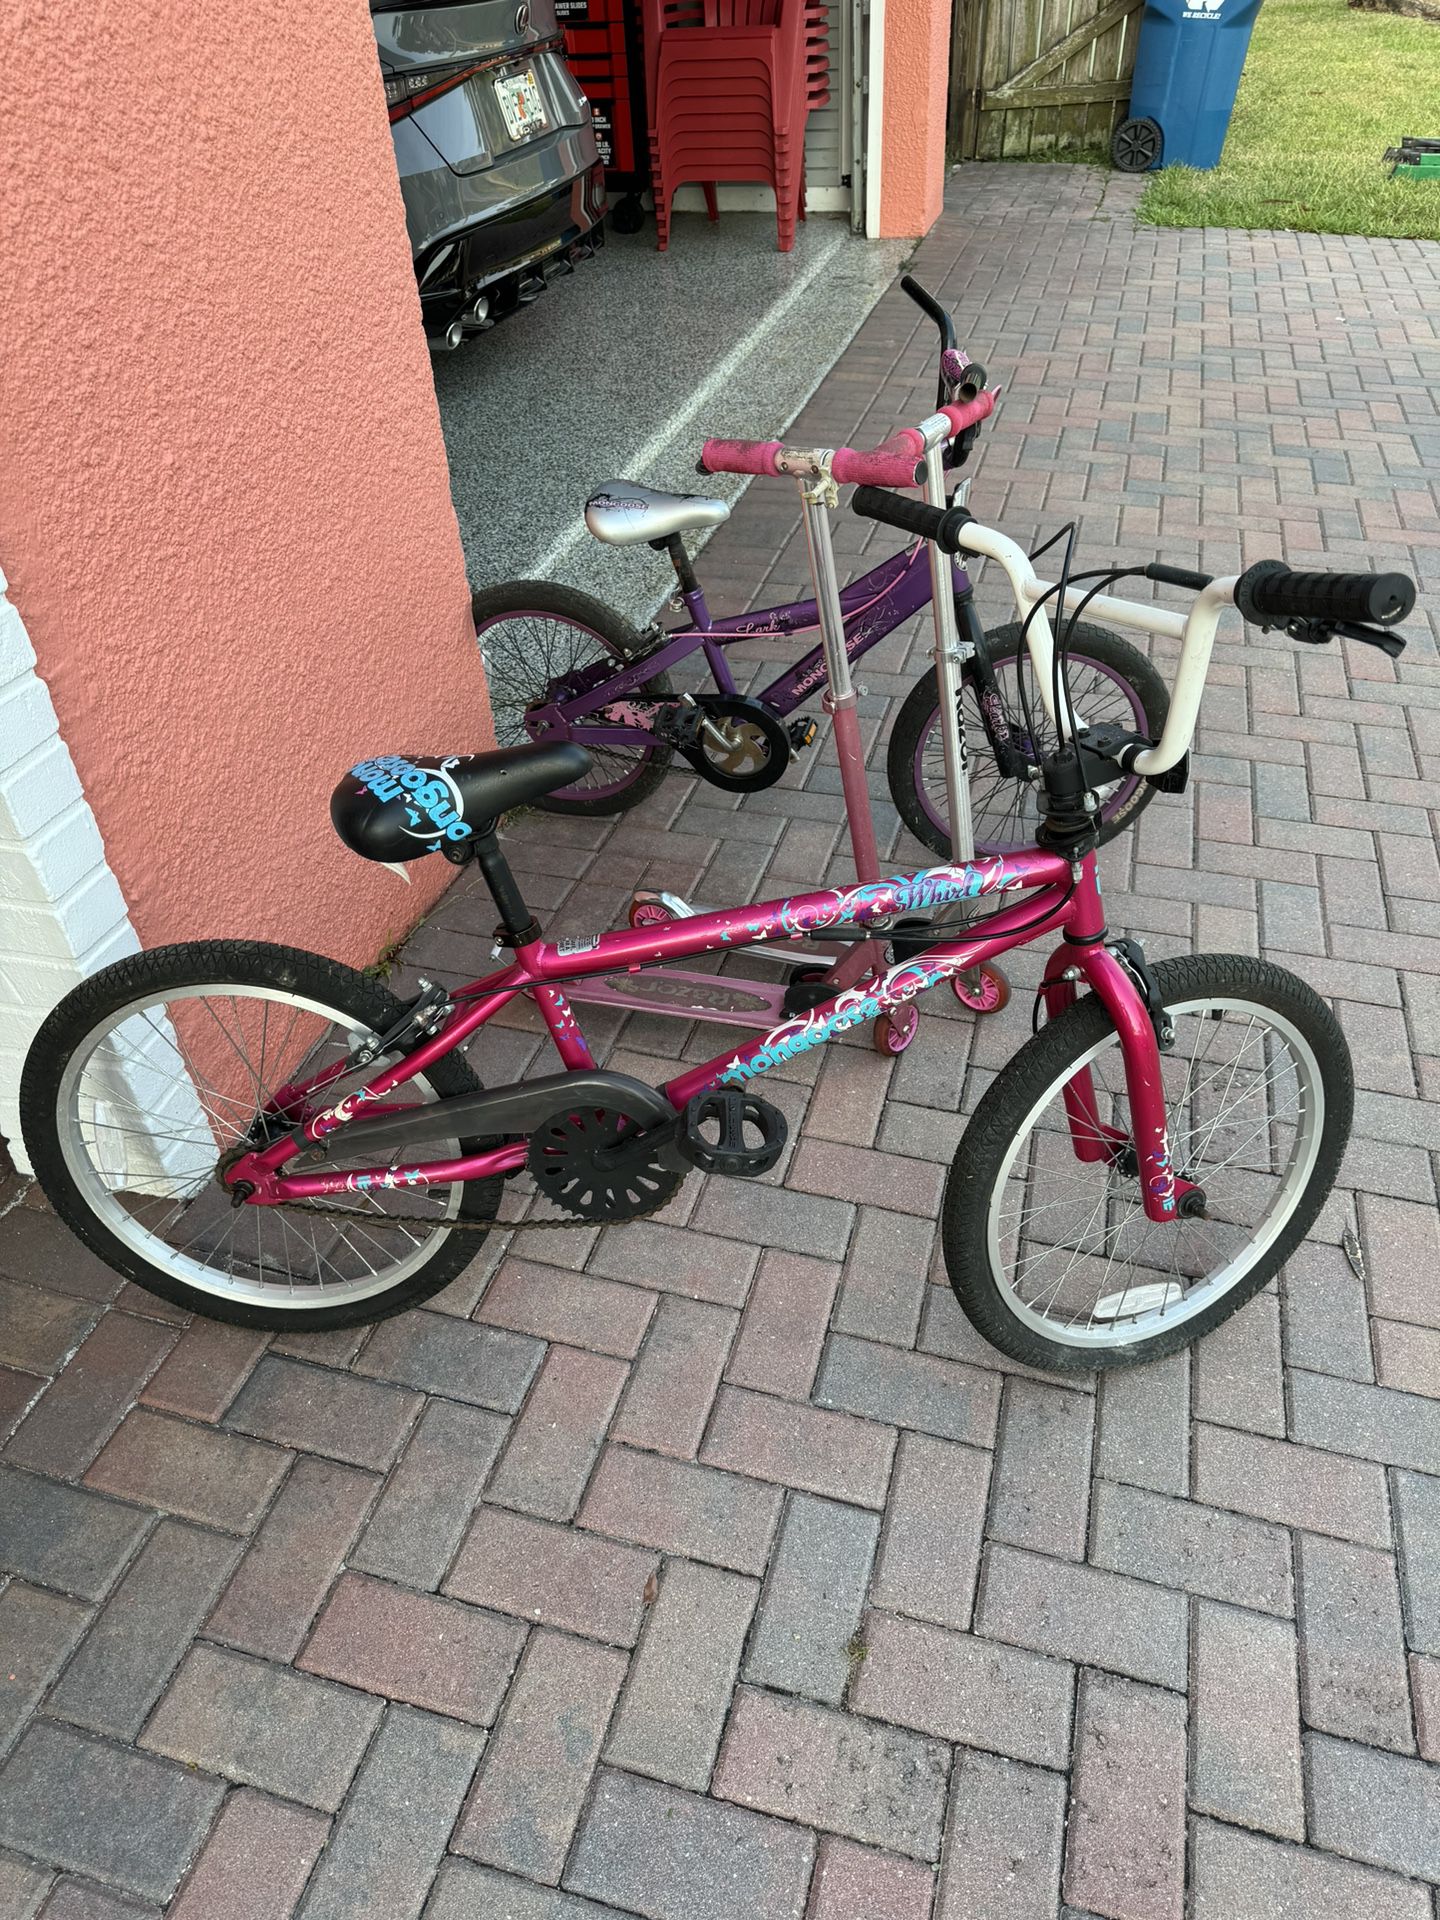 BUNDLE  DEAL! 2  Bikes And 2 Razor Scooter Yes You Will Get All 4 U